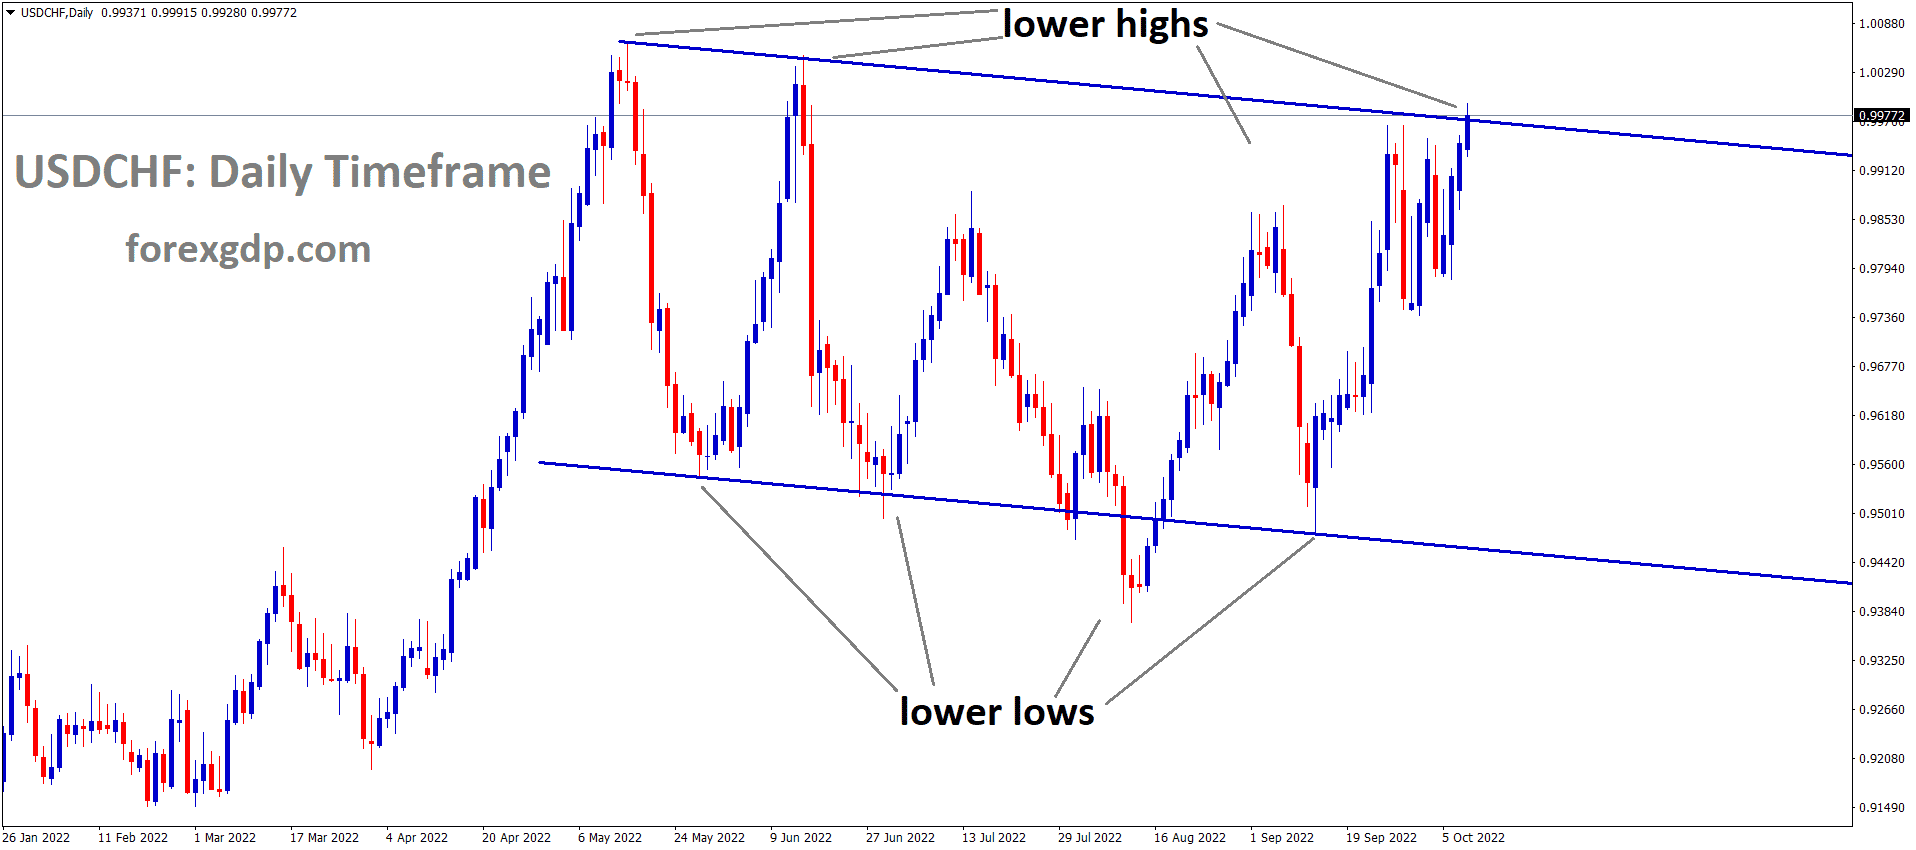 USDCHF is moving in the Descending channel and the market has reached the lower high area of the channel 2